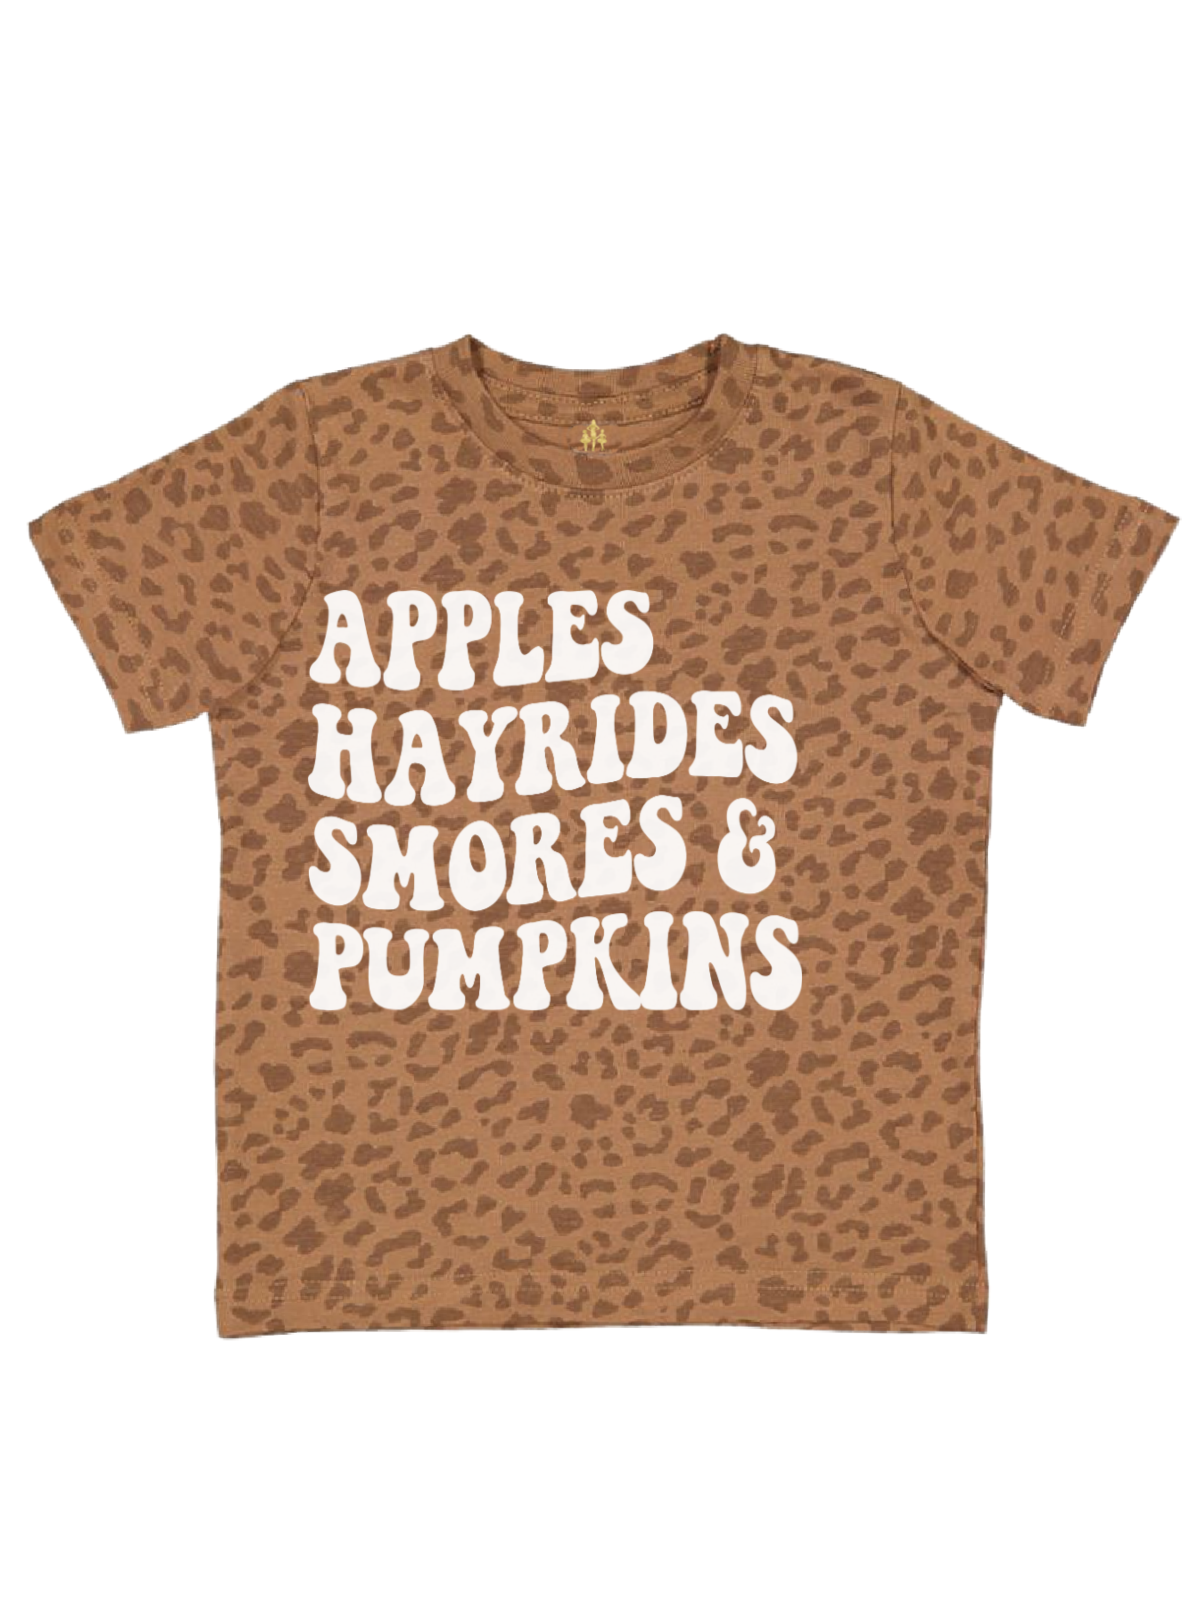 Apples Hayrides Smores and Pumpkins Kids Fall Shirts in Latte Leopard Print and Peach